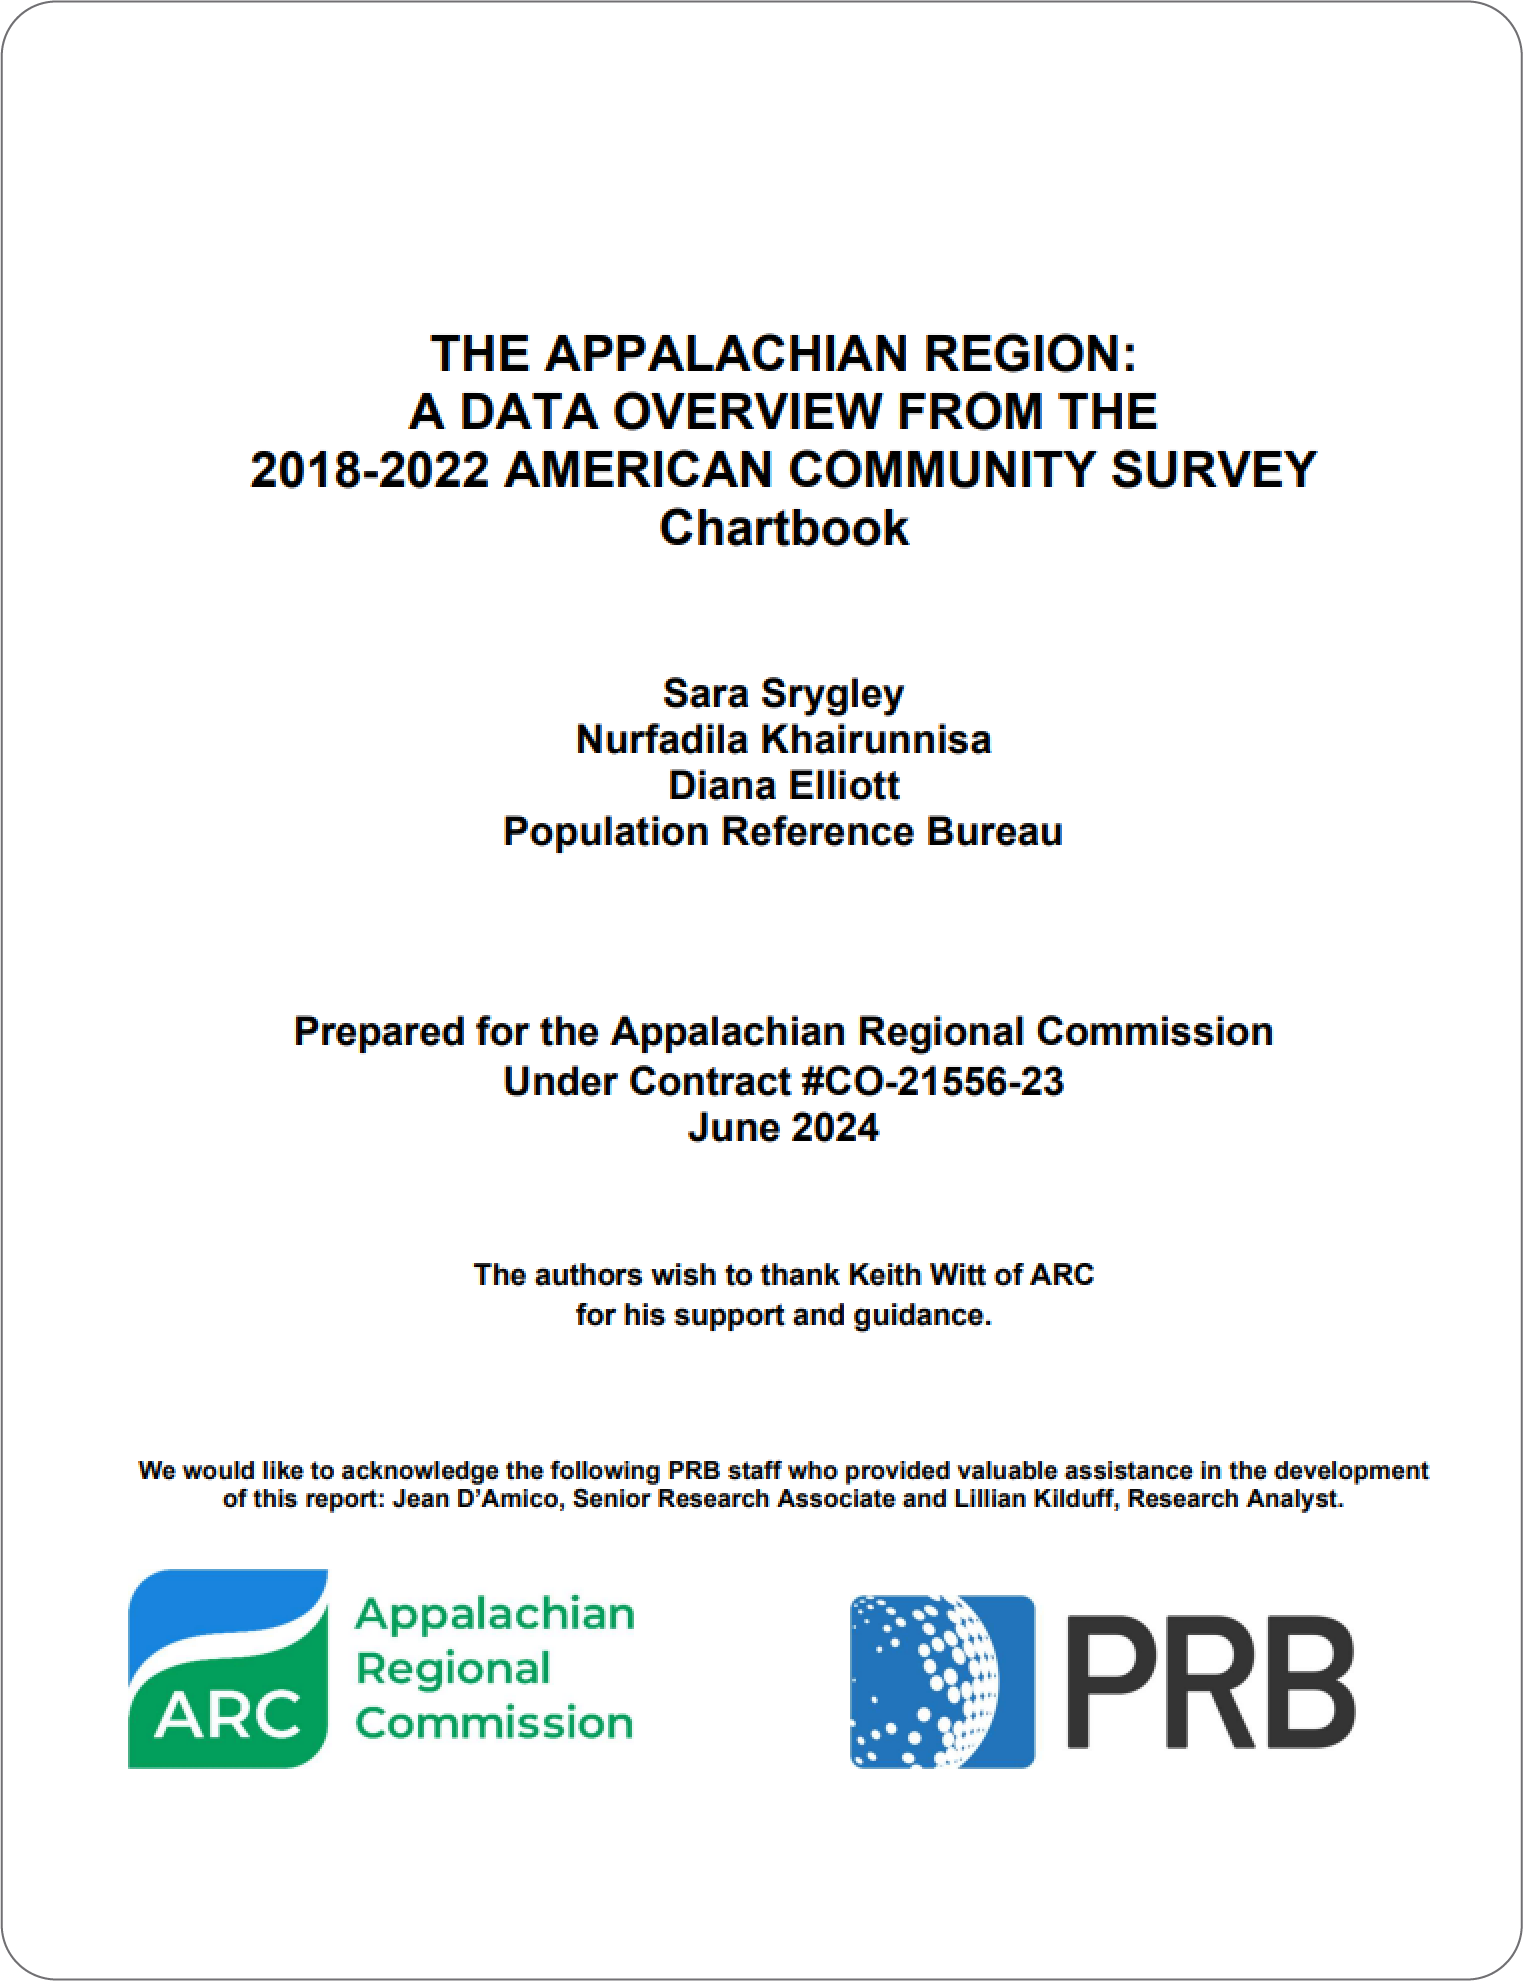 THE APPALACHIAN REGION: A DATA OVERVIEW FROM THE 2018-2022 AMERICAN COMMUNITY SURVEY Chartbook